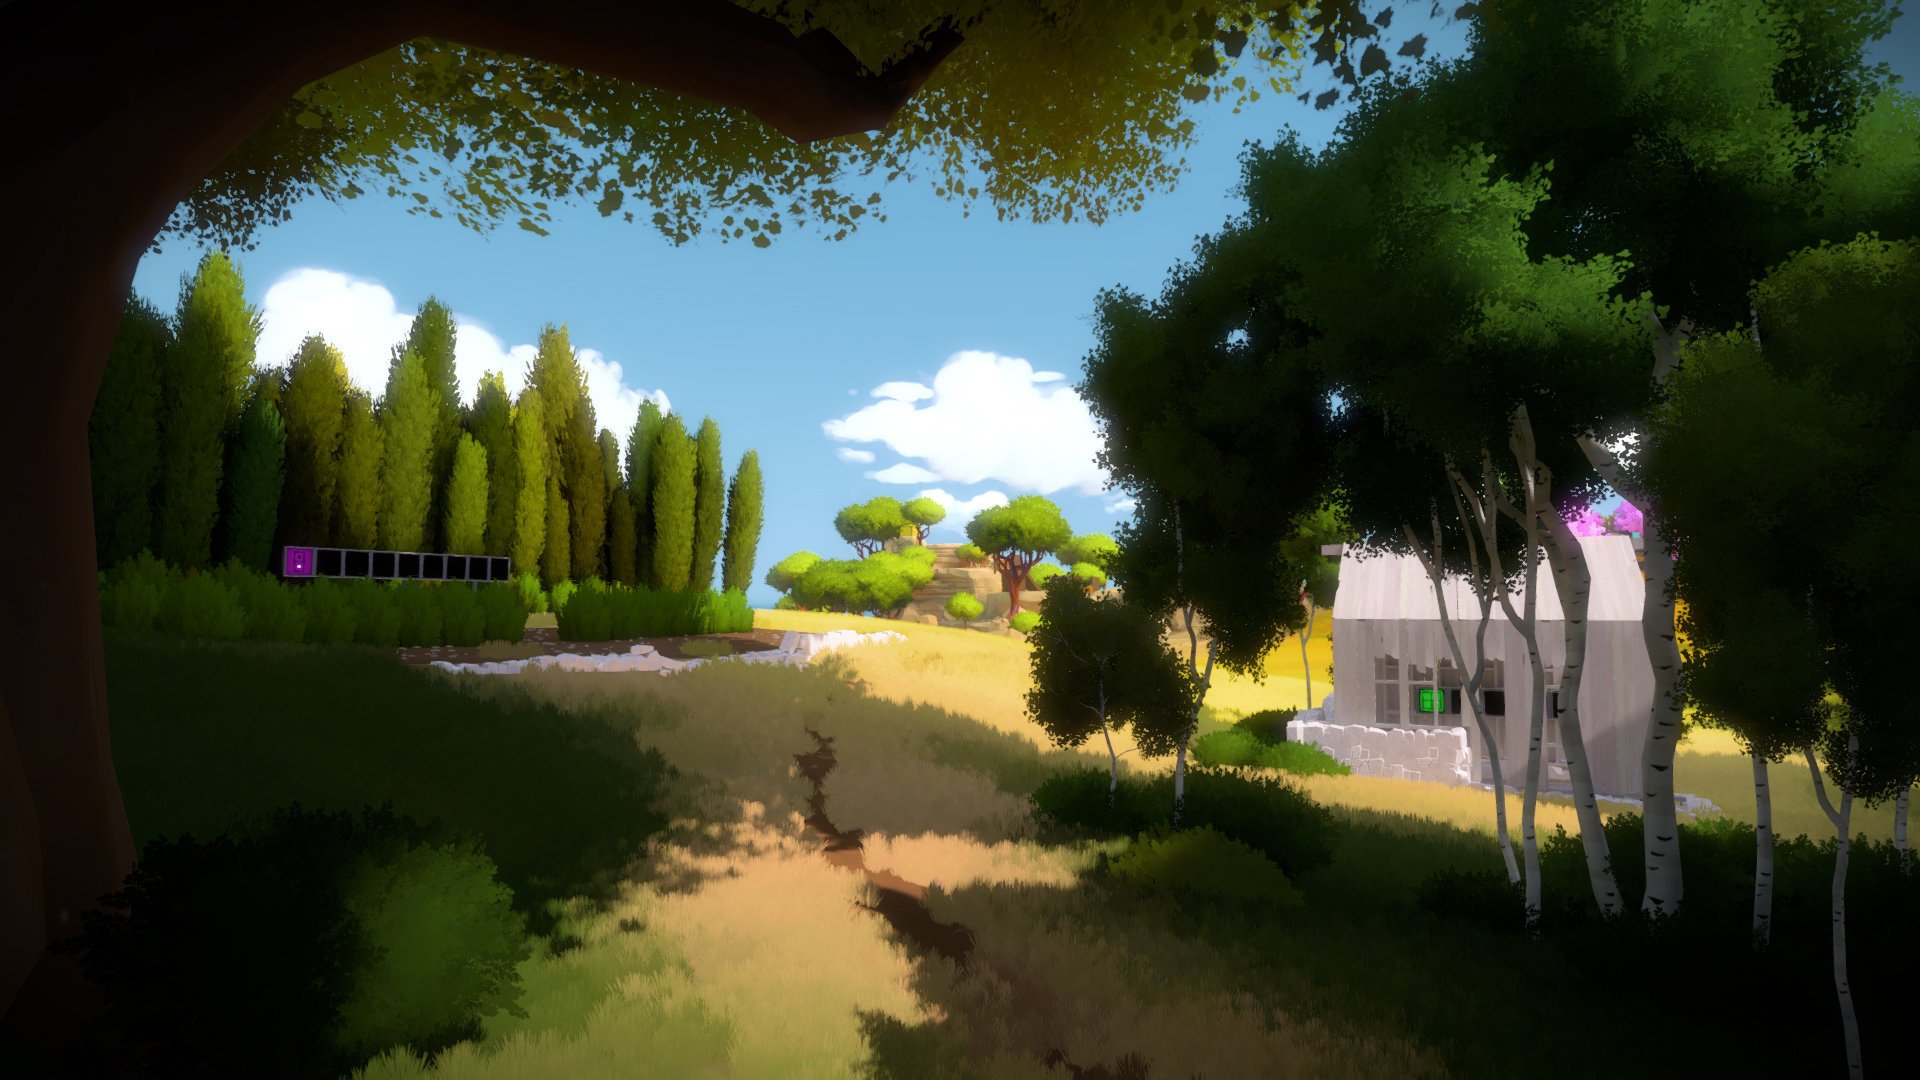 The Witness (PS4 / PlayStation 4) Game Profile | News, Reviews, Videos